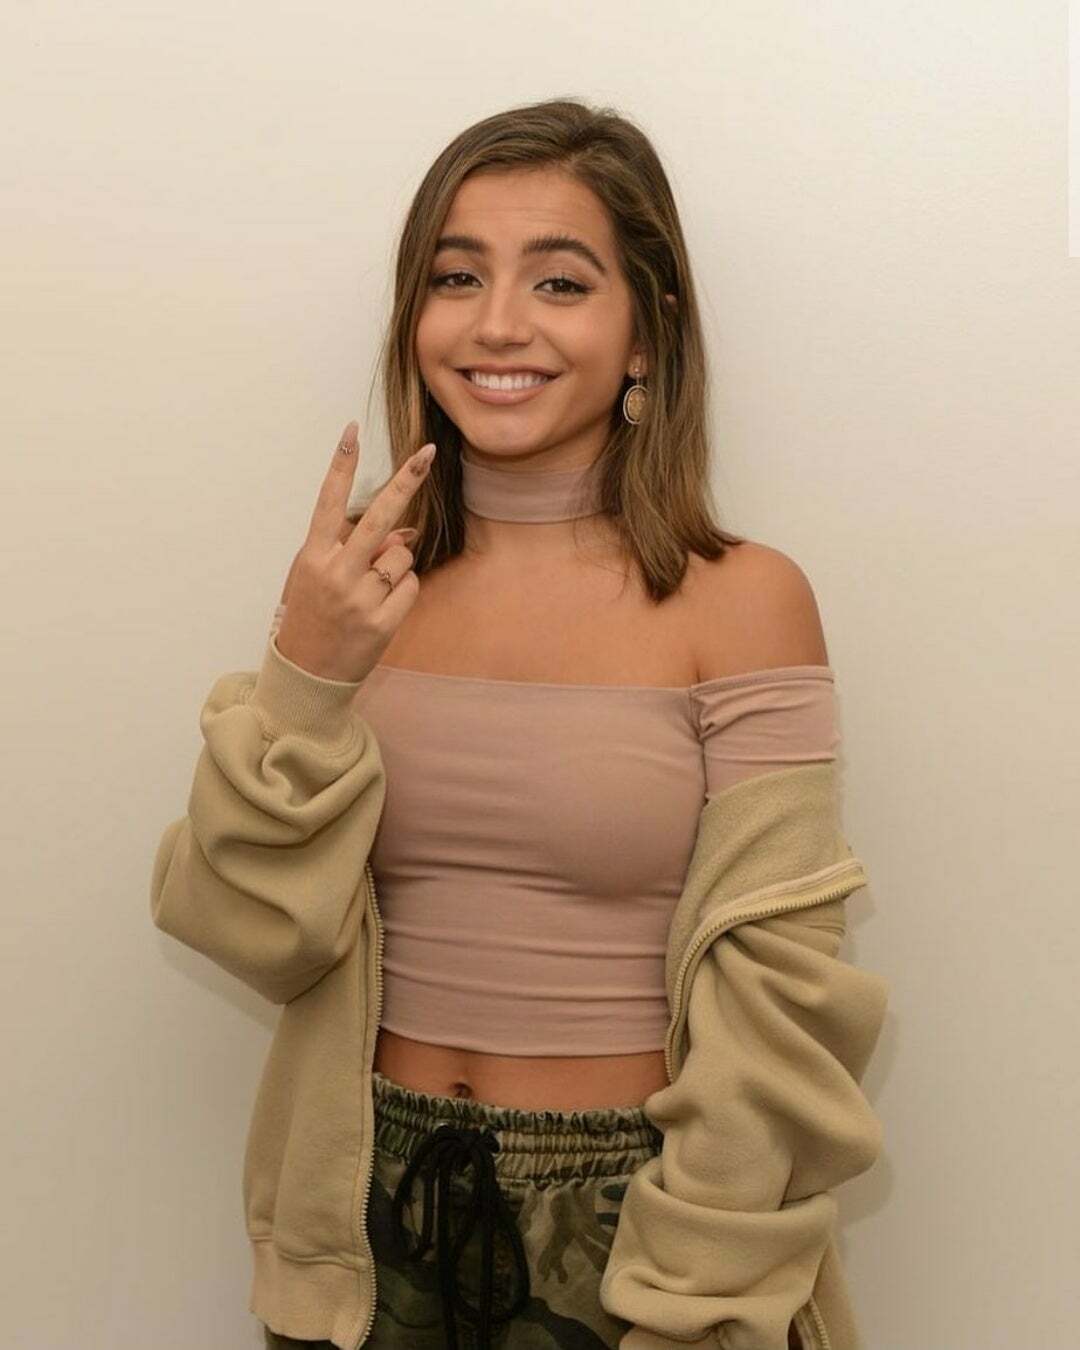 Isabela Moner giving out that V sign hinting she wants someone to eat out her teen pussy.